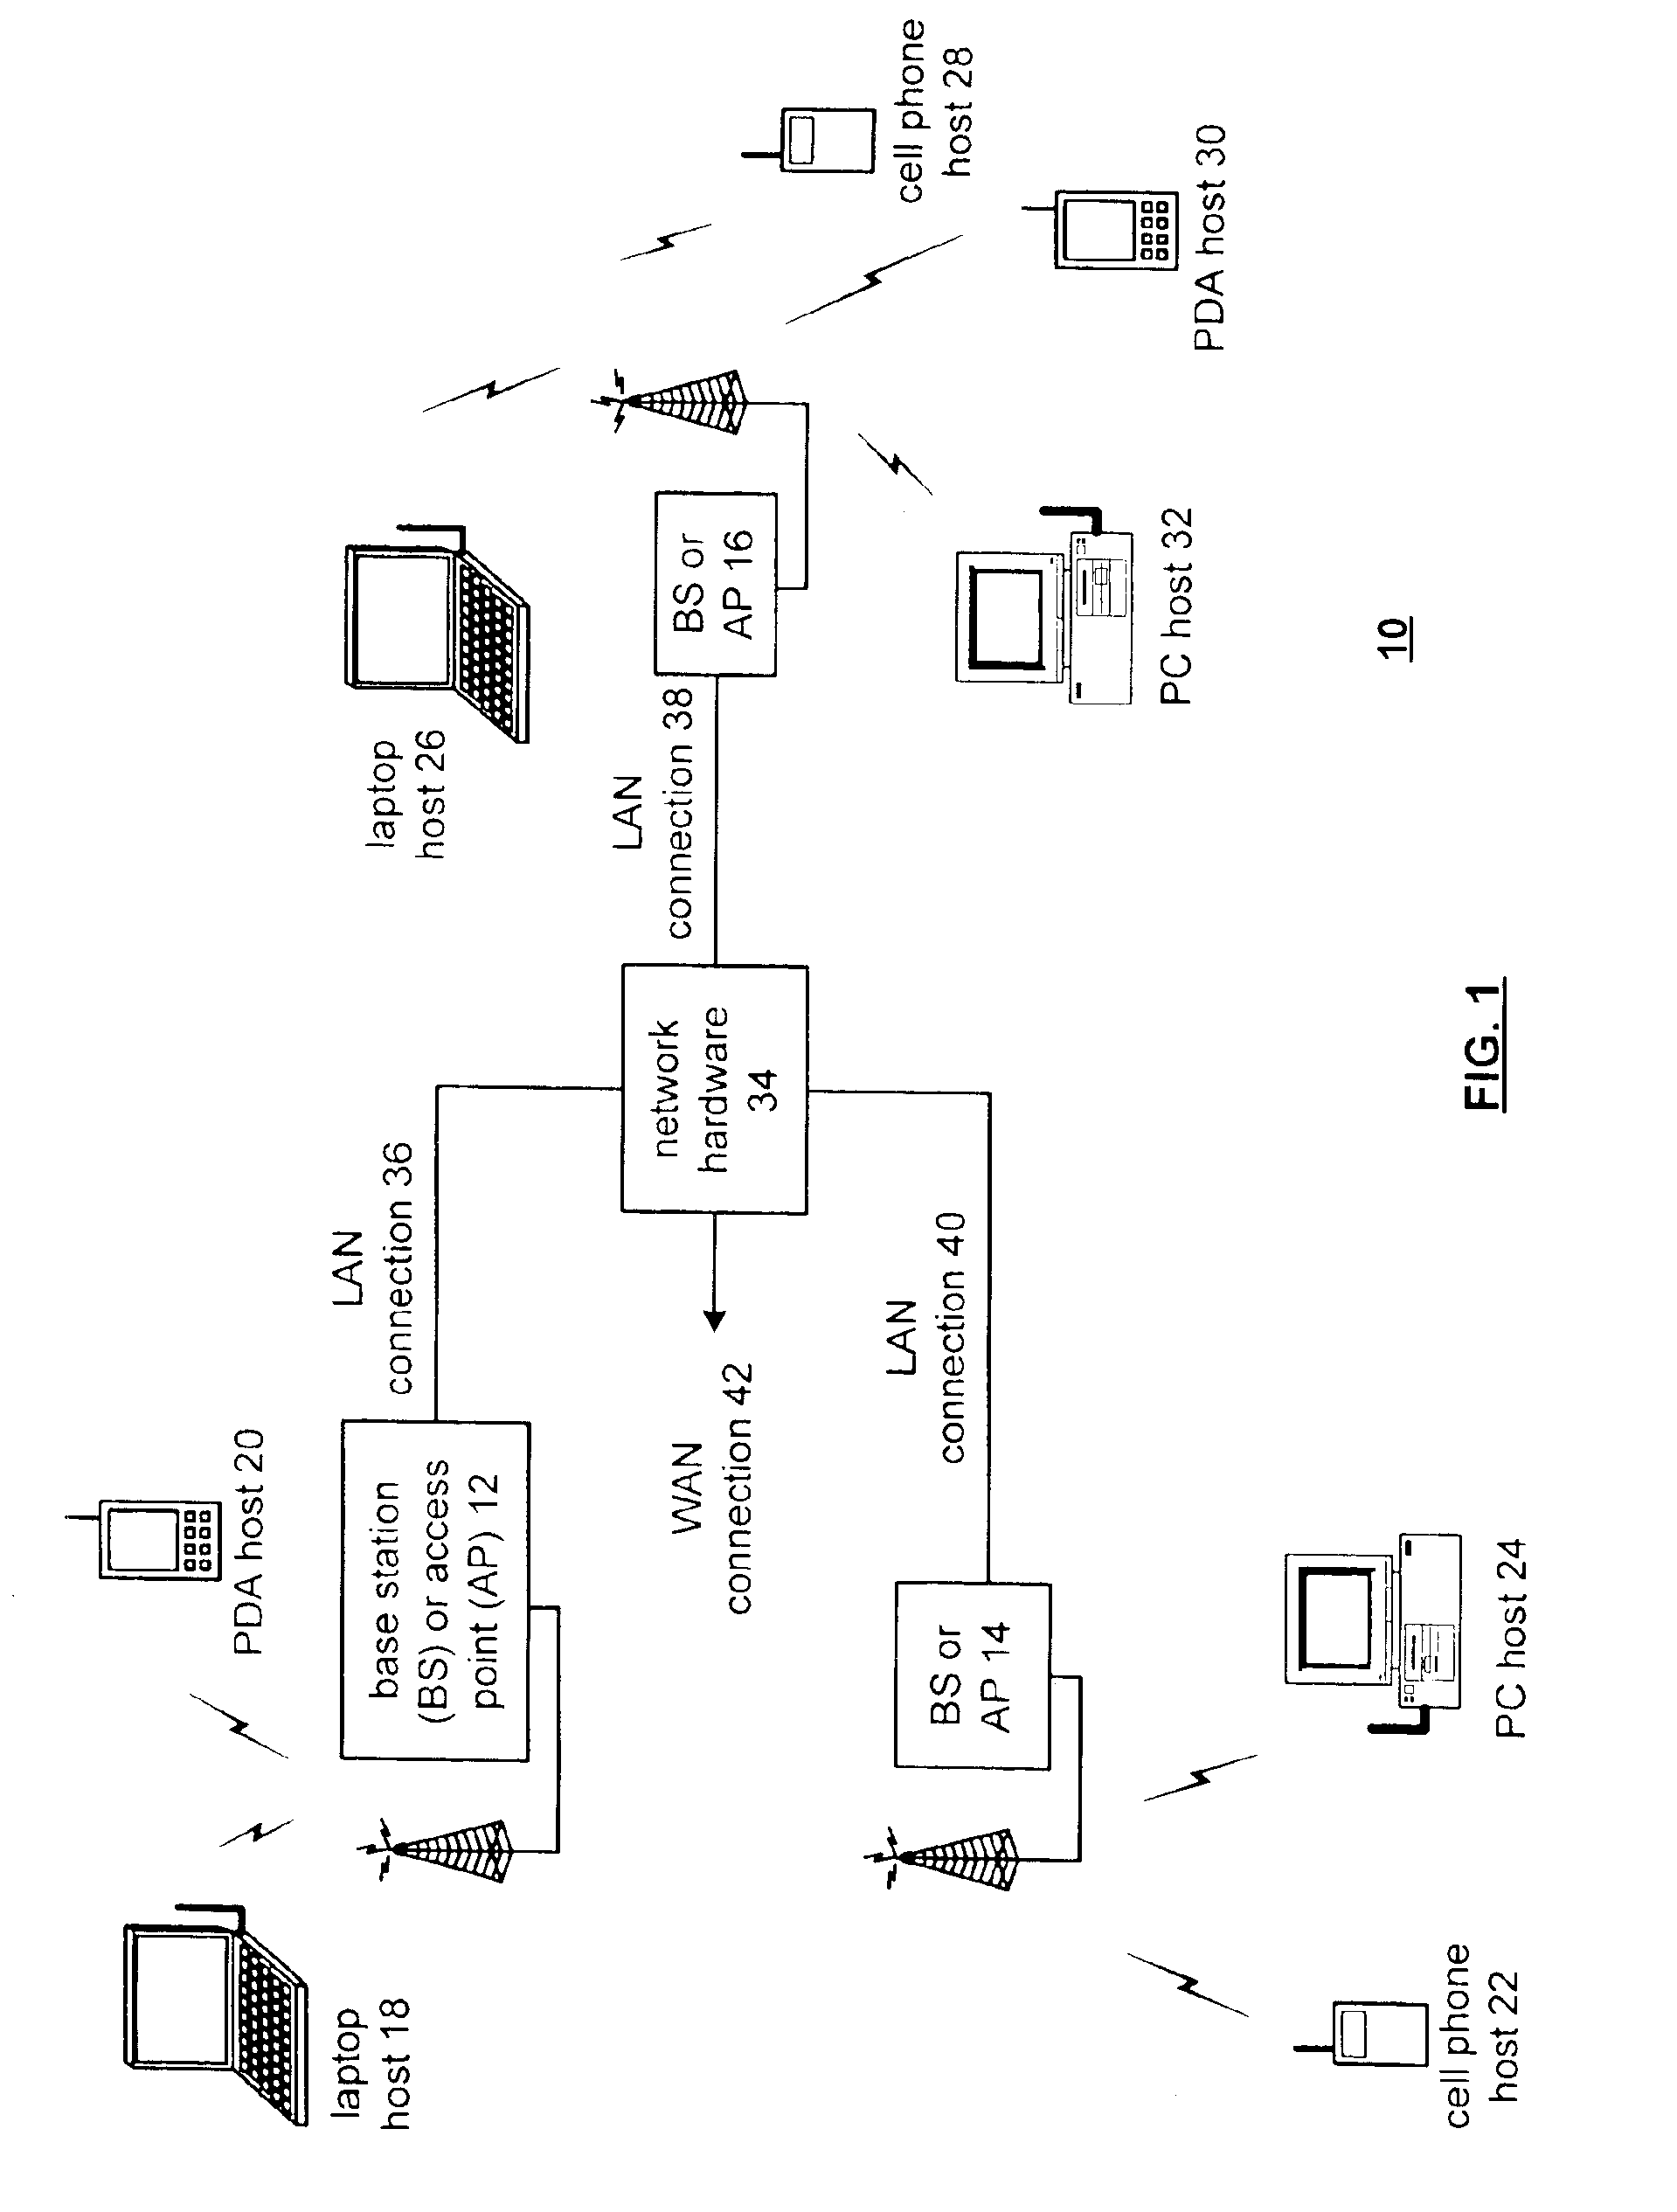 Method of scalable gray coding